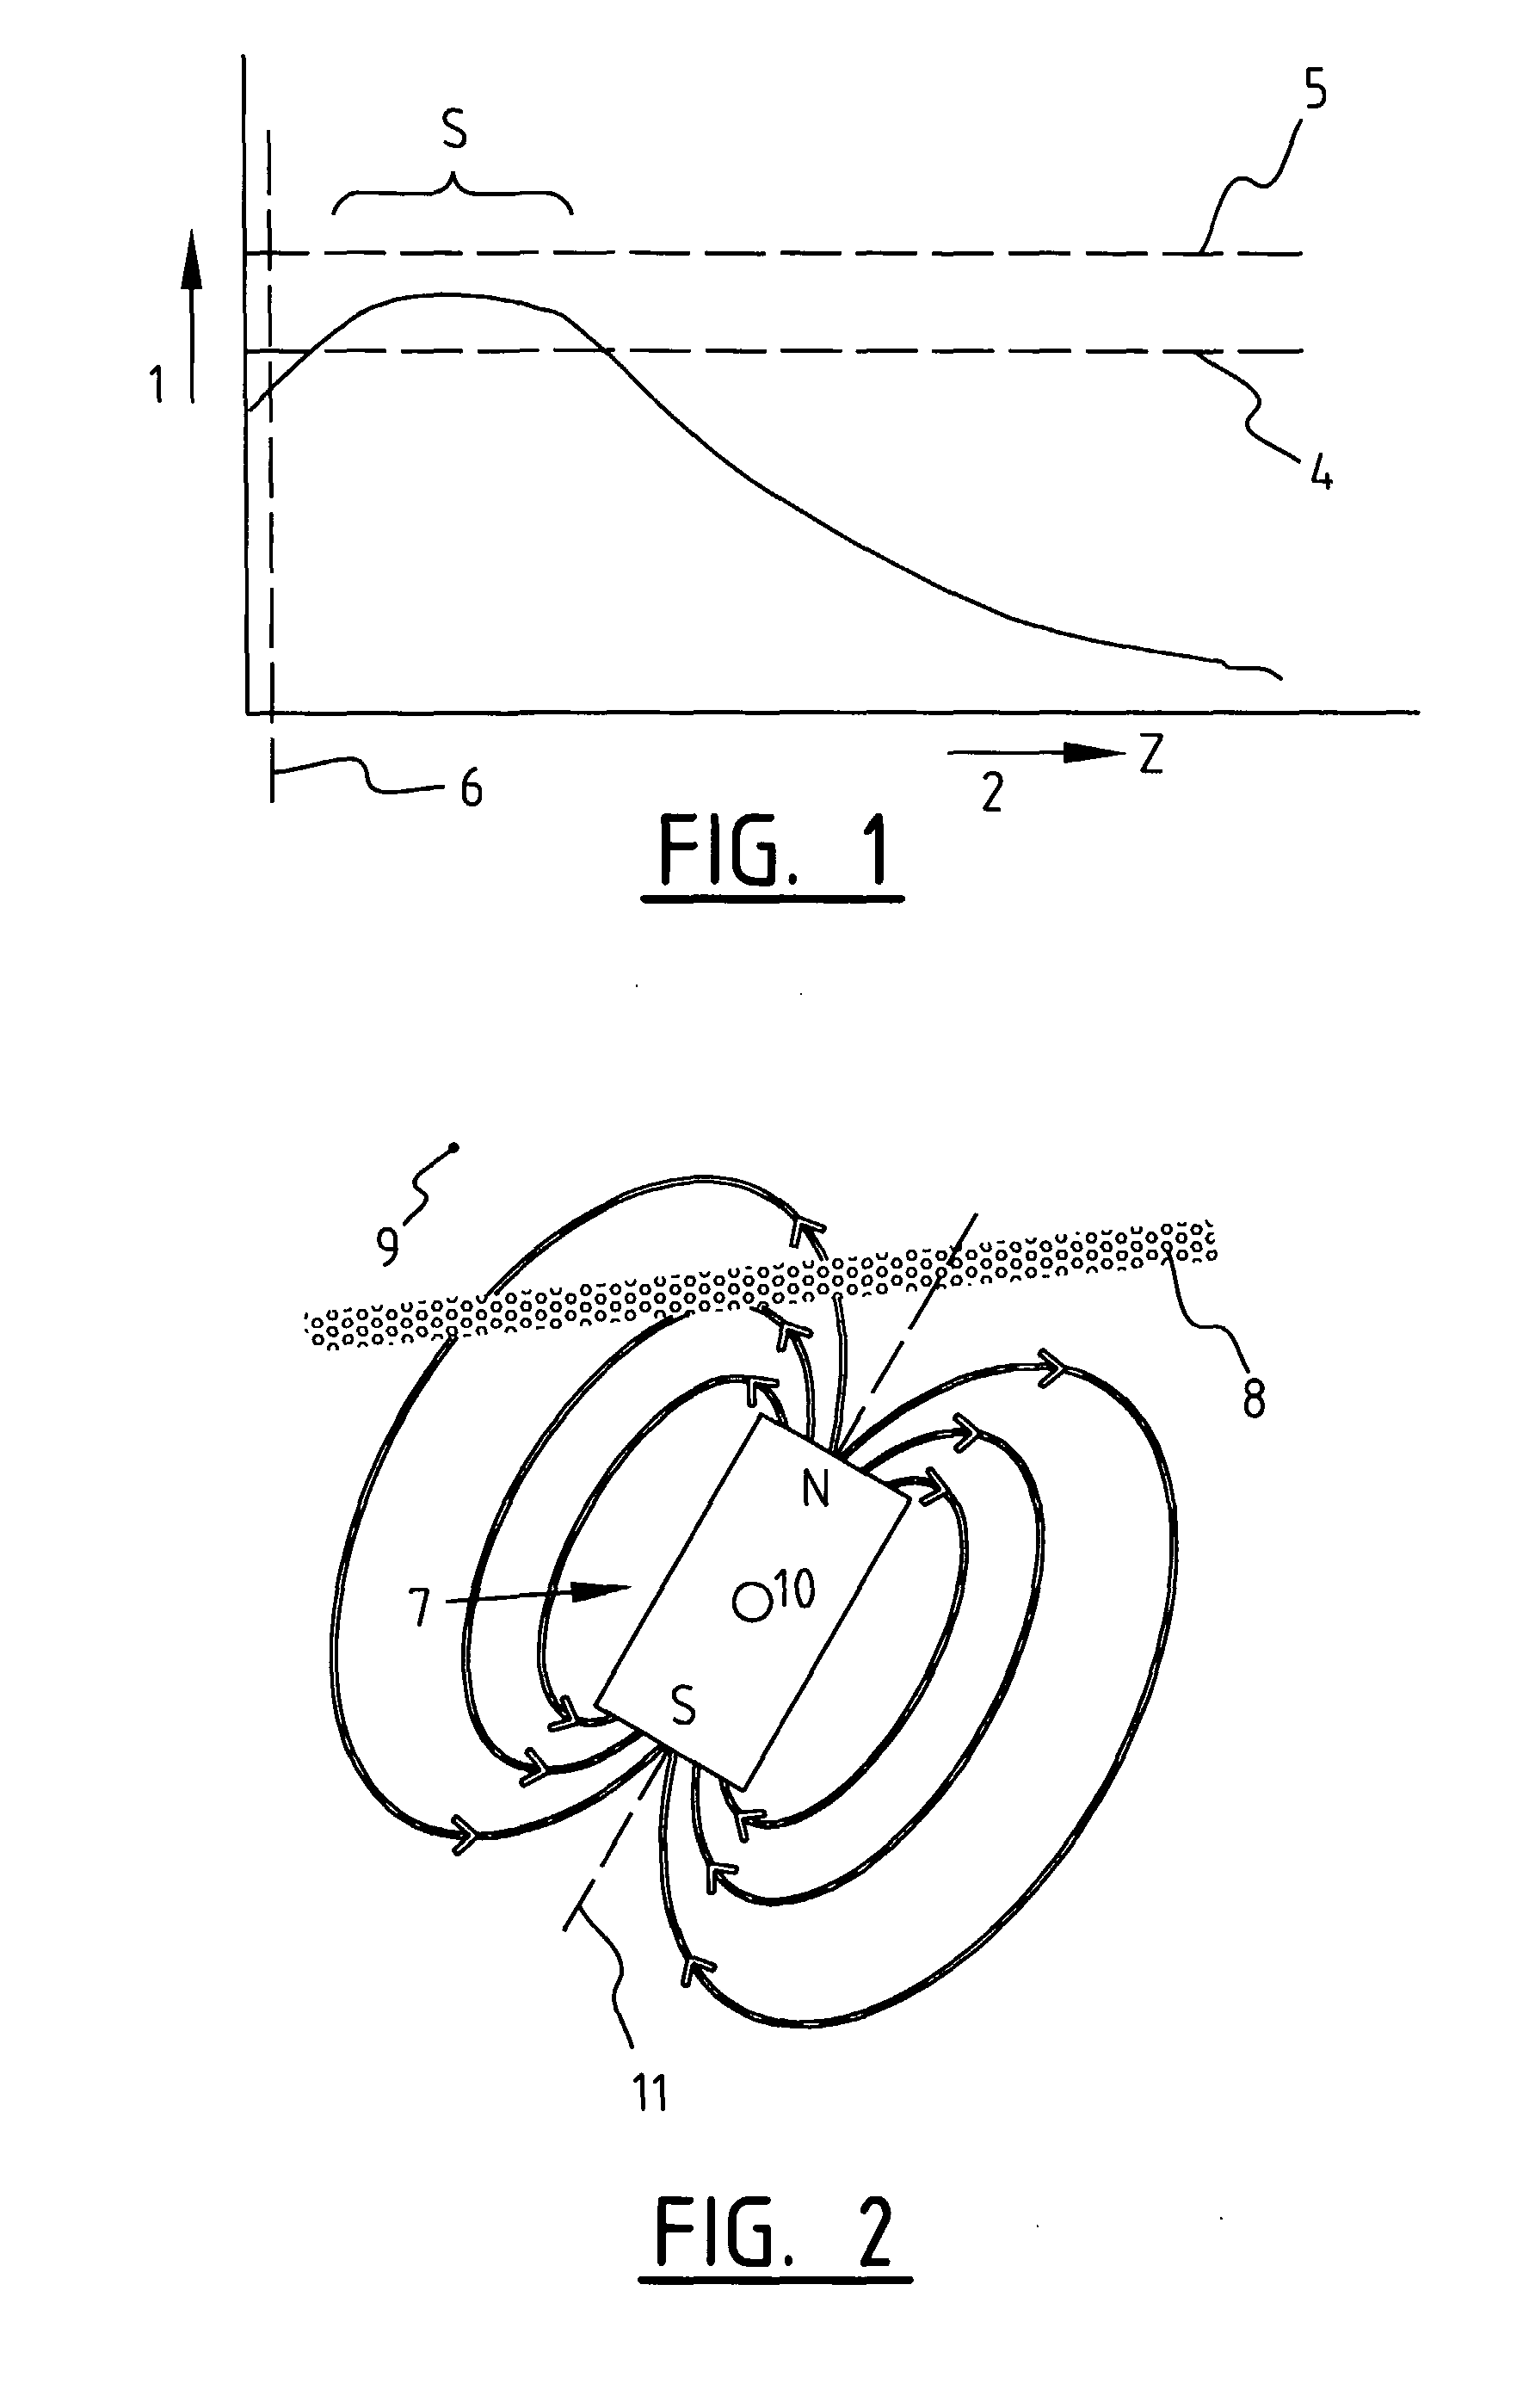 Apparatus For Generating Electric Current Field In The Human Body And Method For The Use Thereof